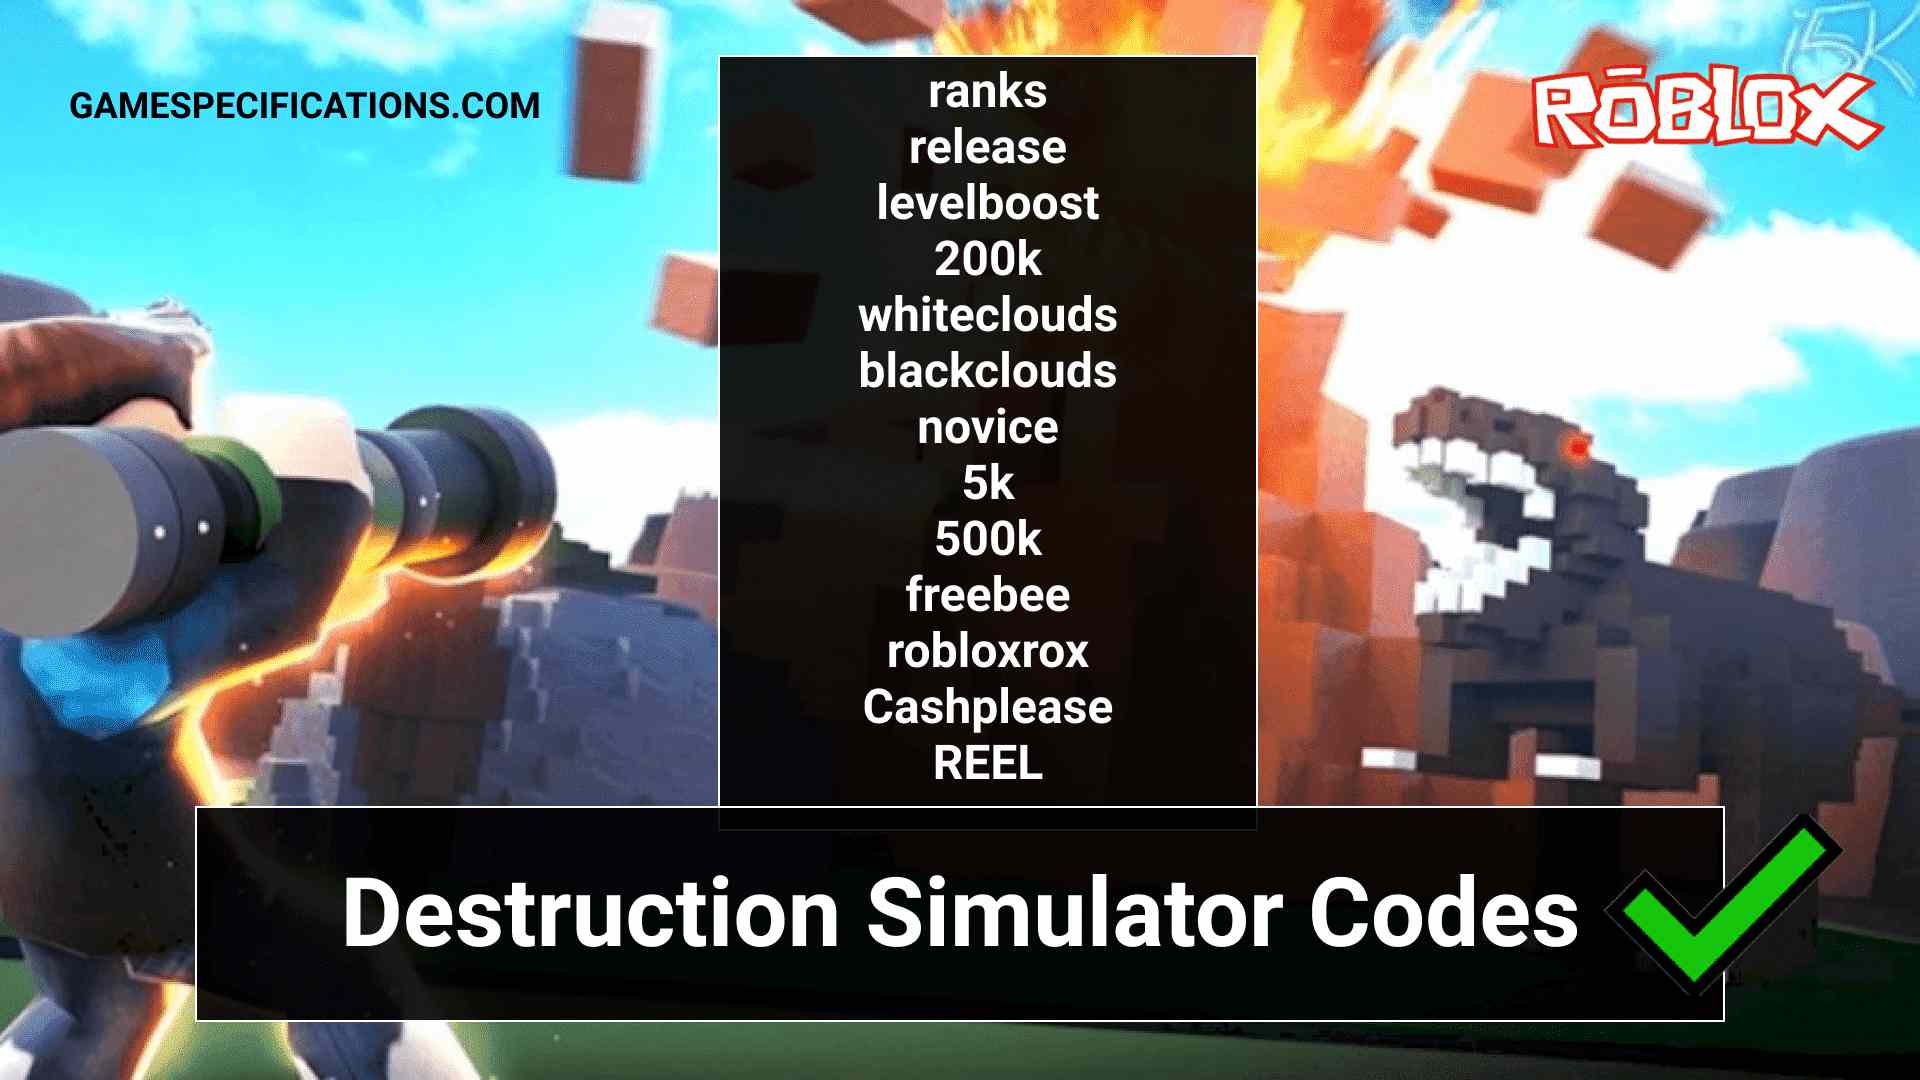 All 27 Roblox Destruction Simulator Codes [July 2021] - Game Specifications